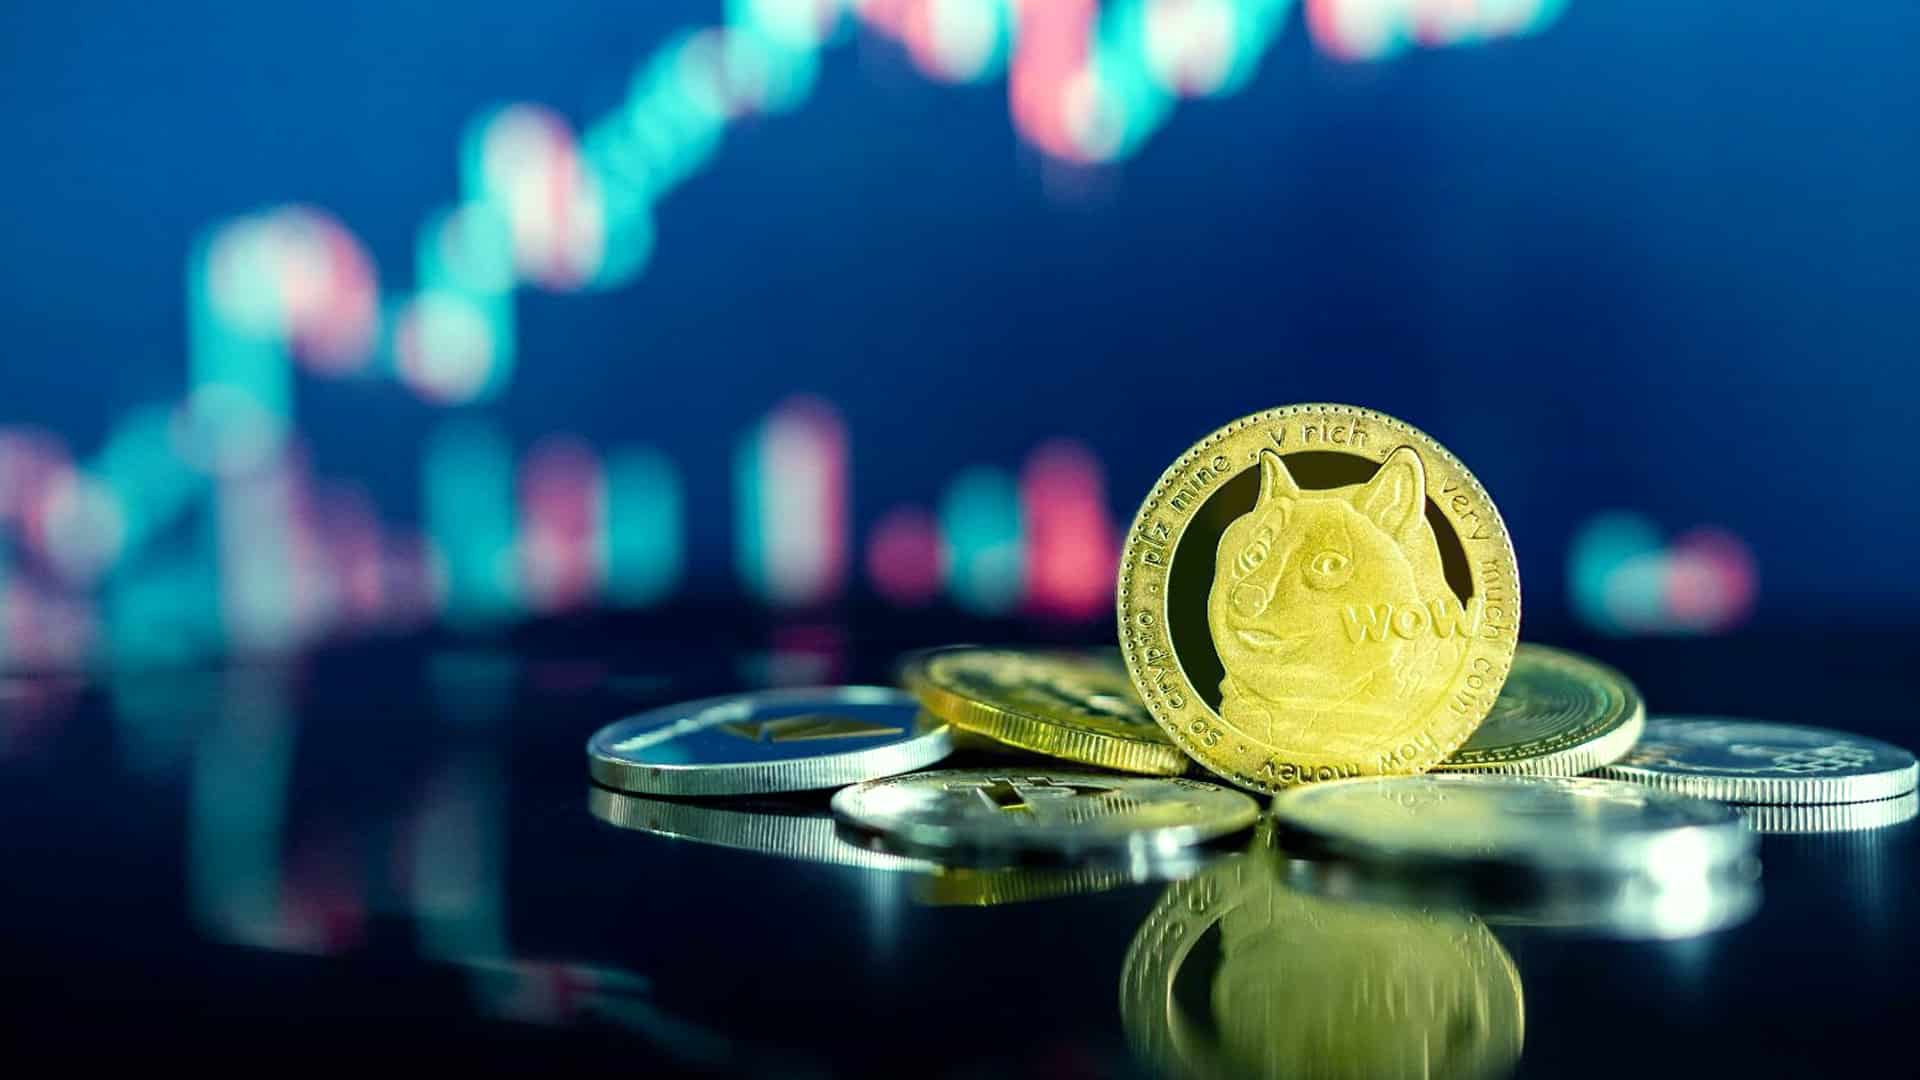 BuyUcoin Launches NFT Marketplace, Lists Top 5 NFT Tokens for Investors